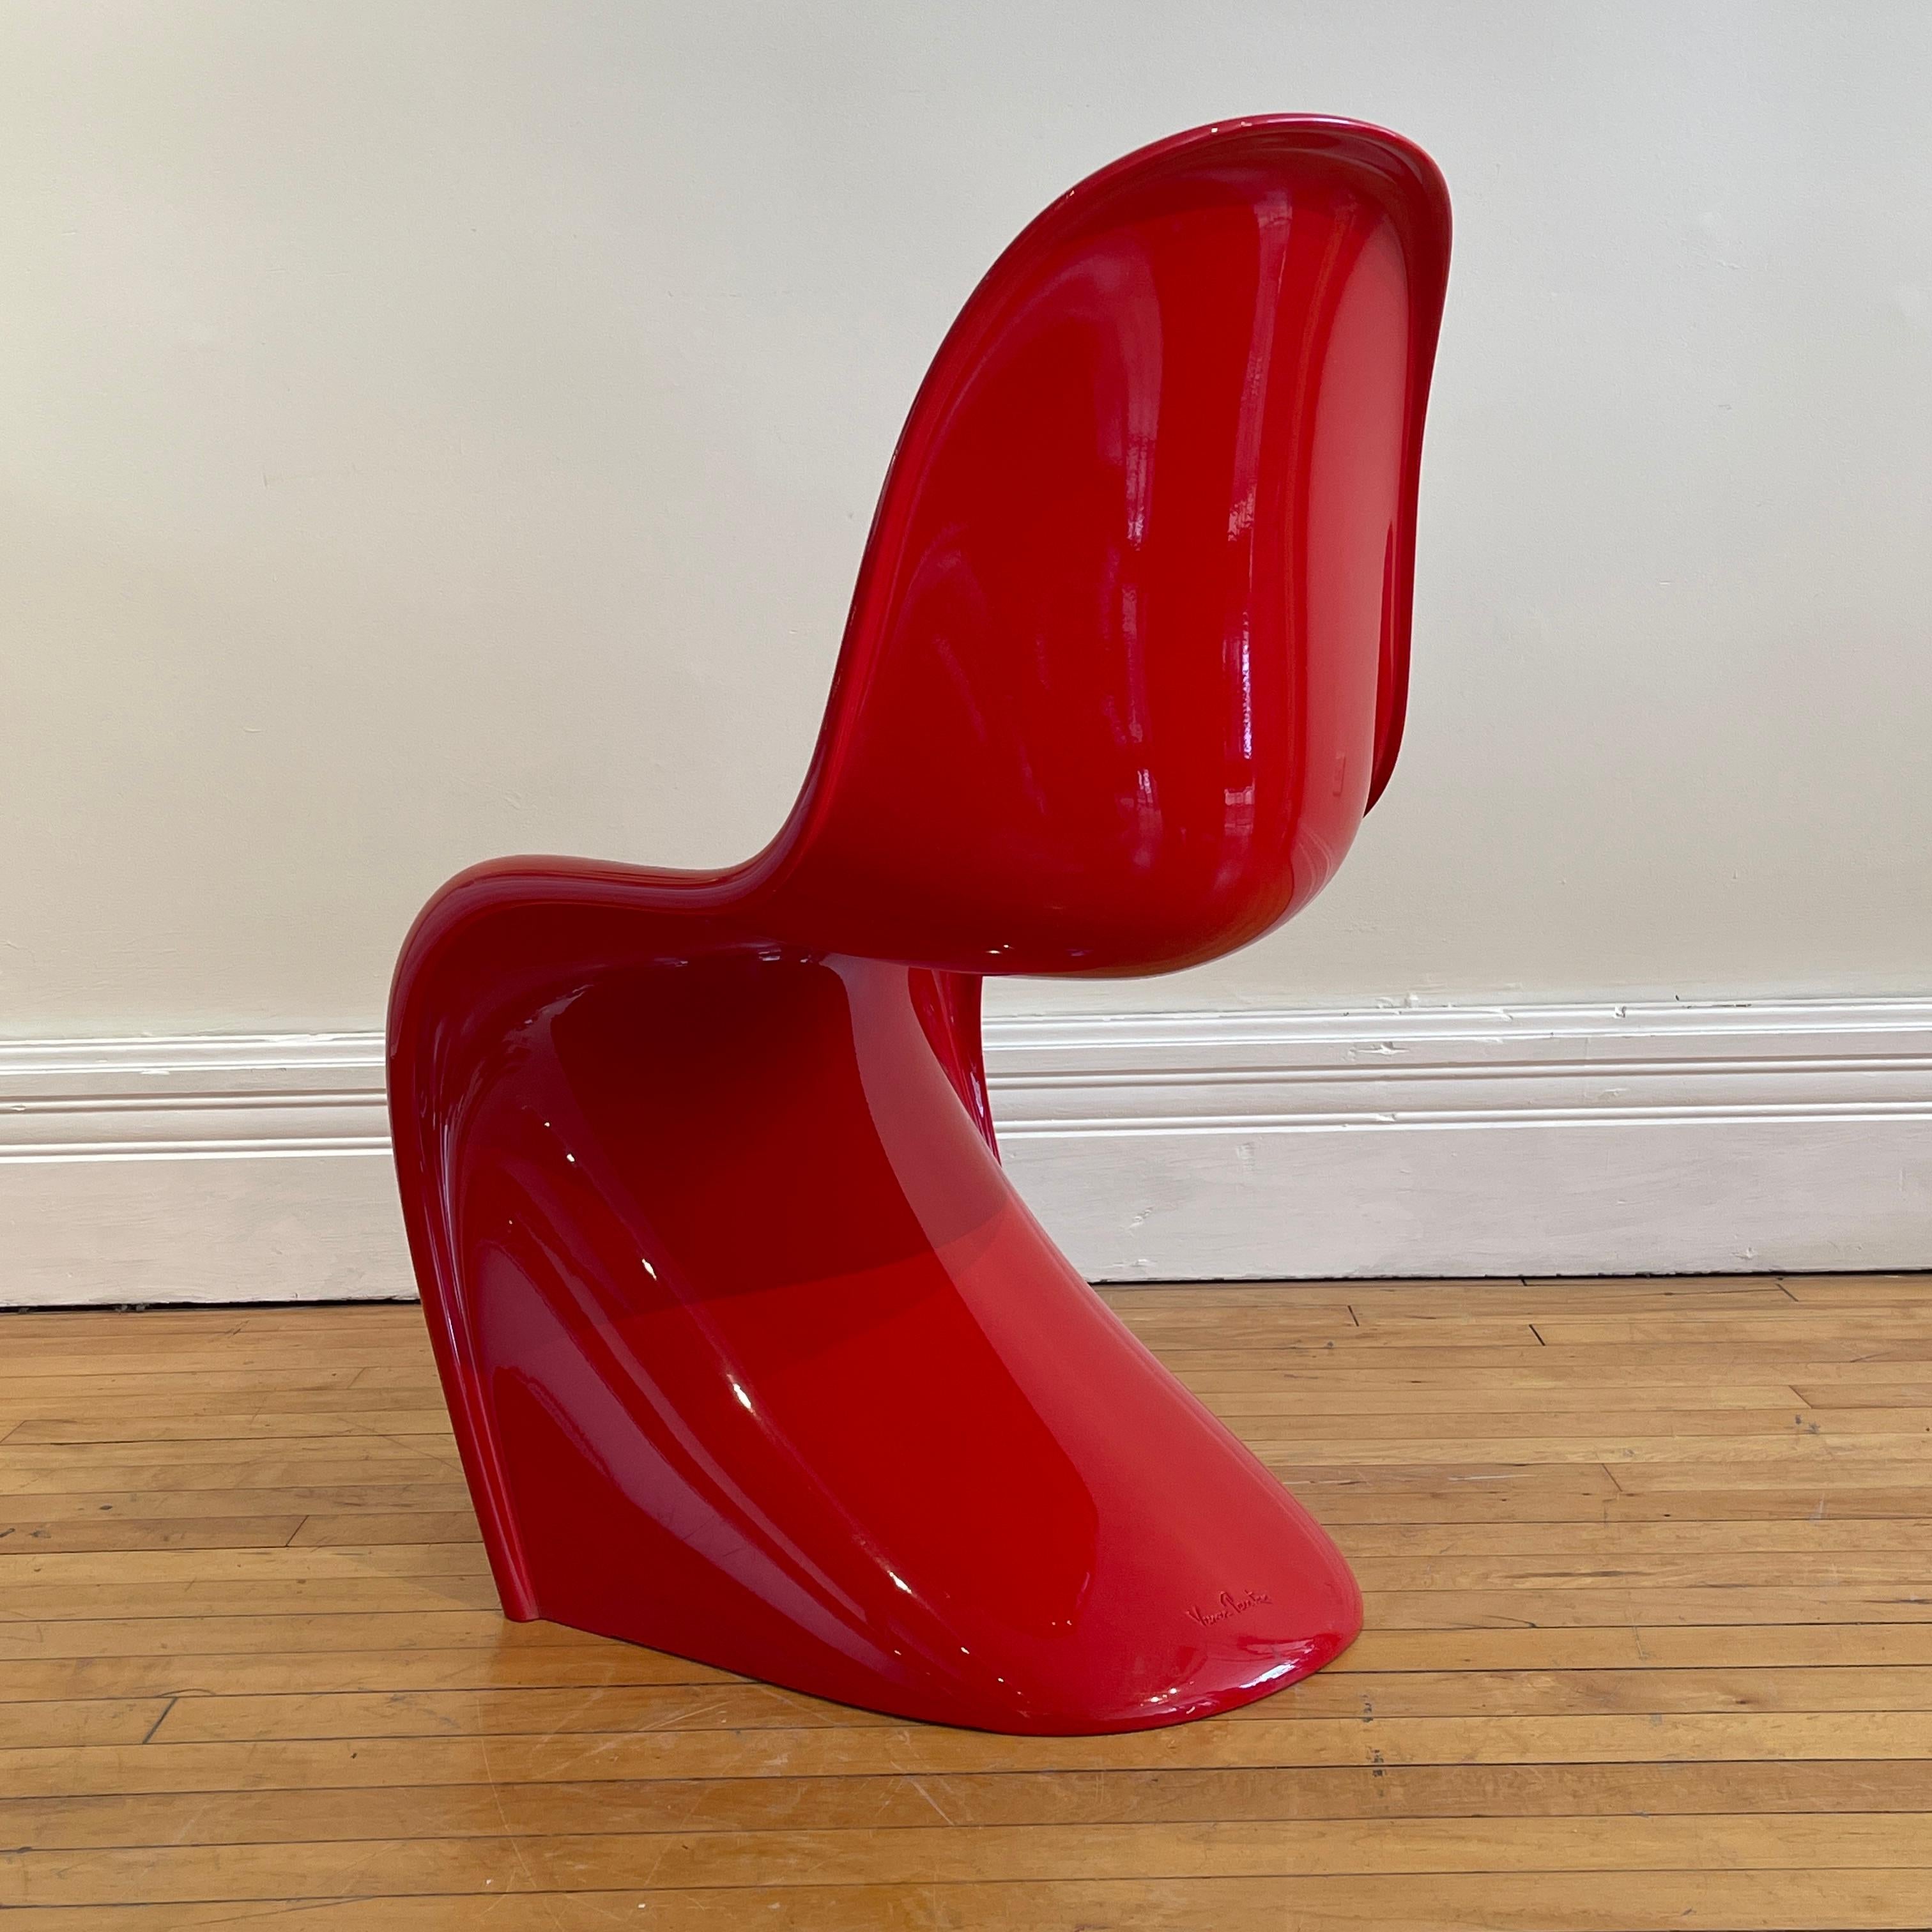 20th Century Verner Panton Classic Chairs in Red 2  Available